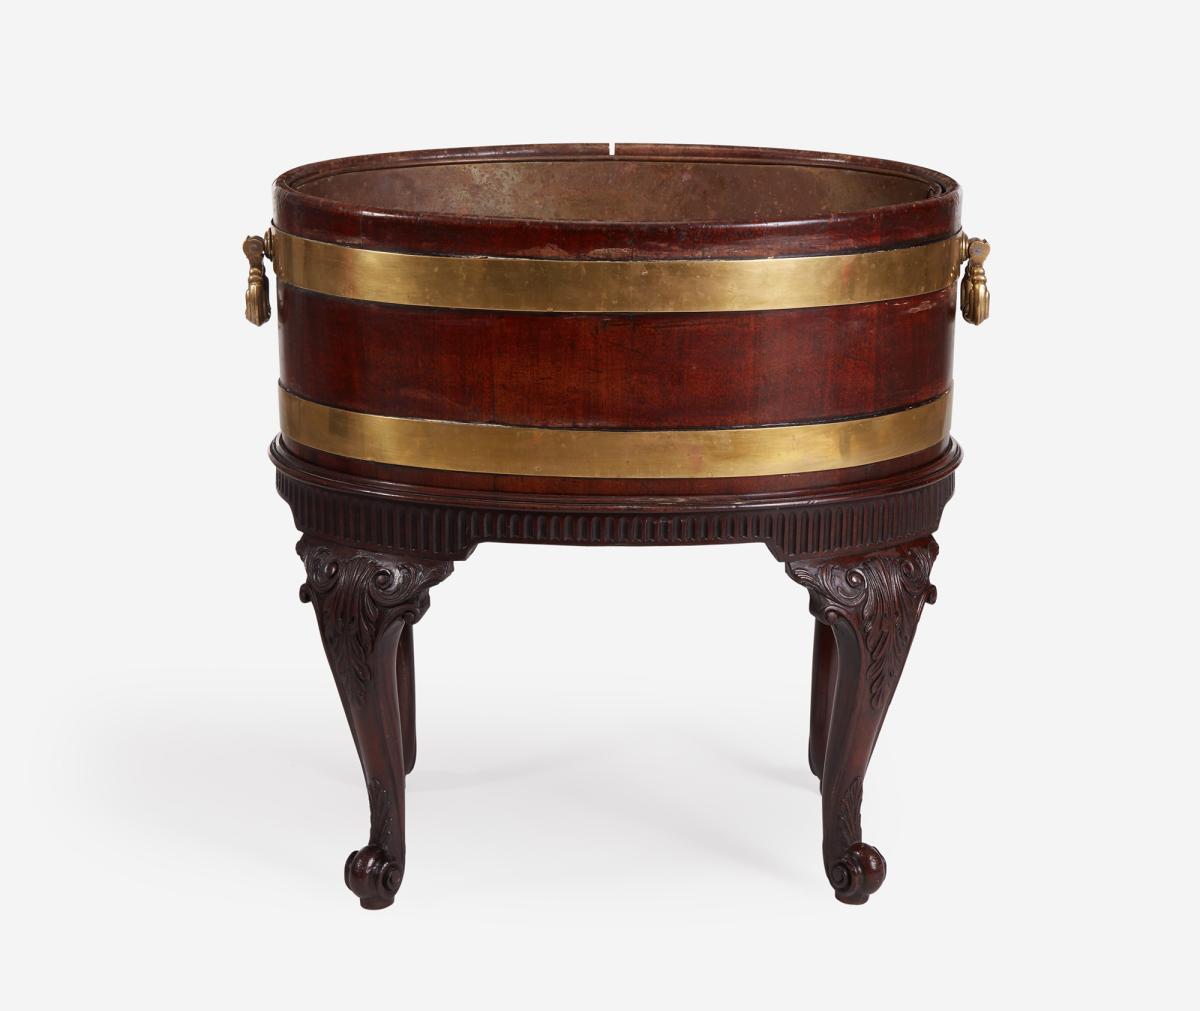 George III Brass Bound Mahogany Wine Cooler or Cellaret With Liner on Beautifully Carved Stand